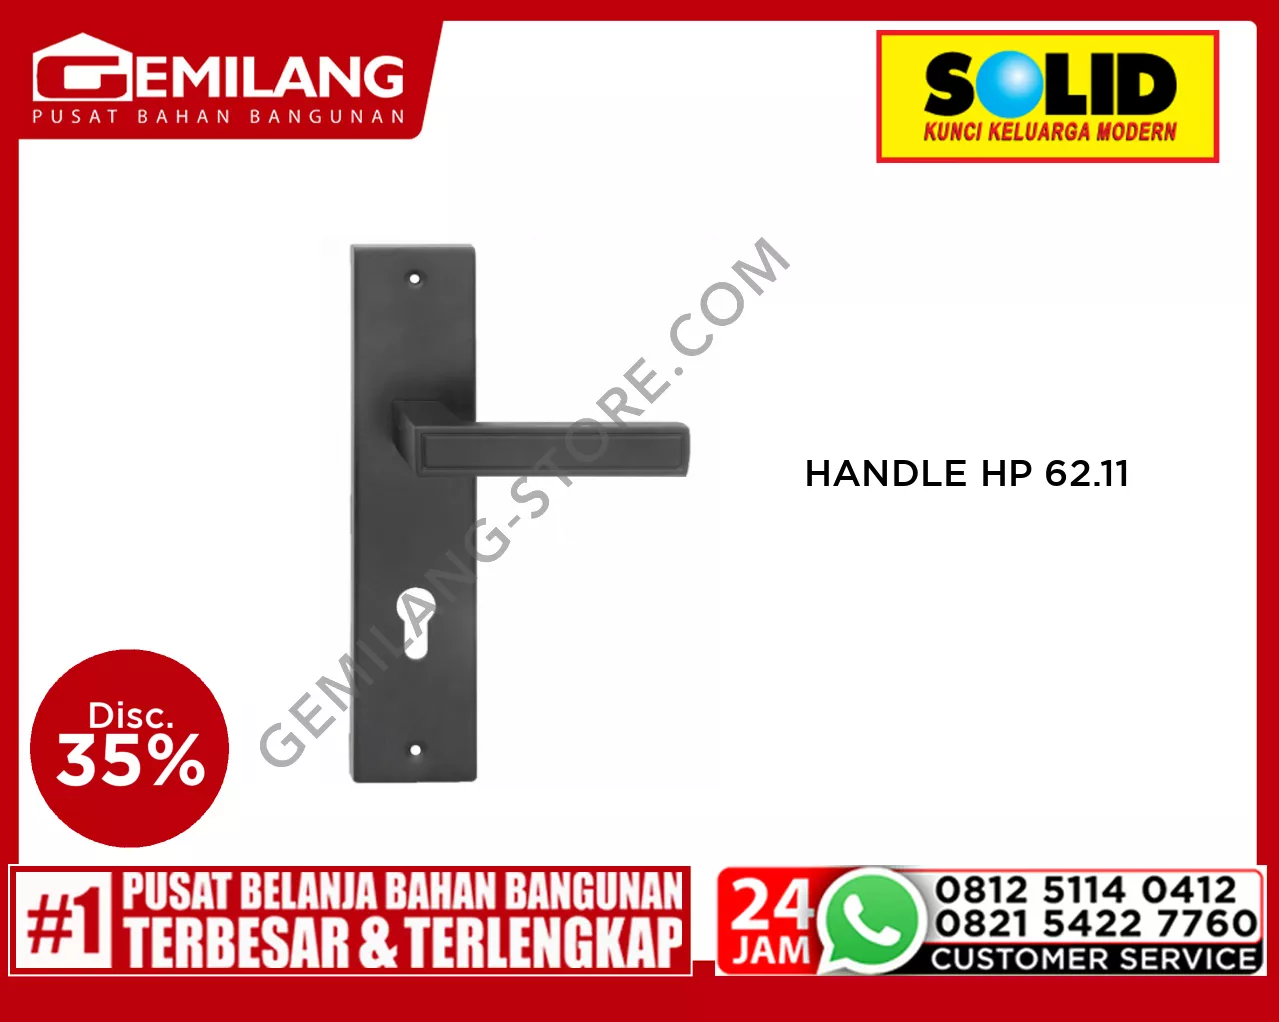 SOLID HANDLE HP 62.11 BL